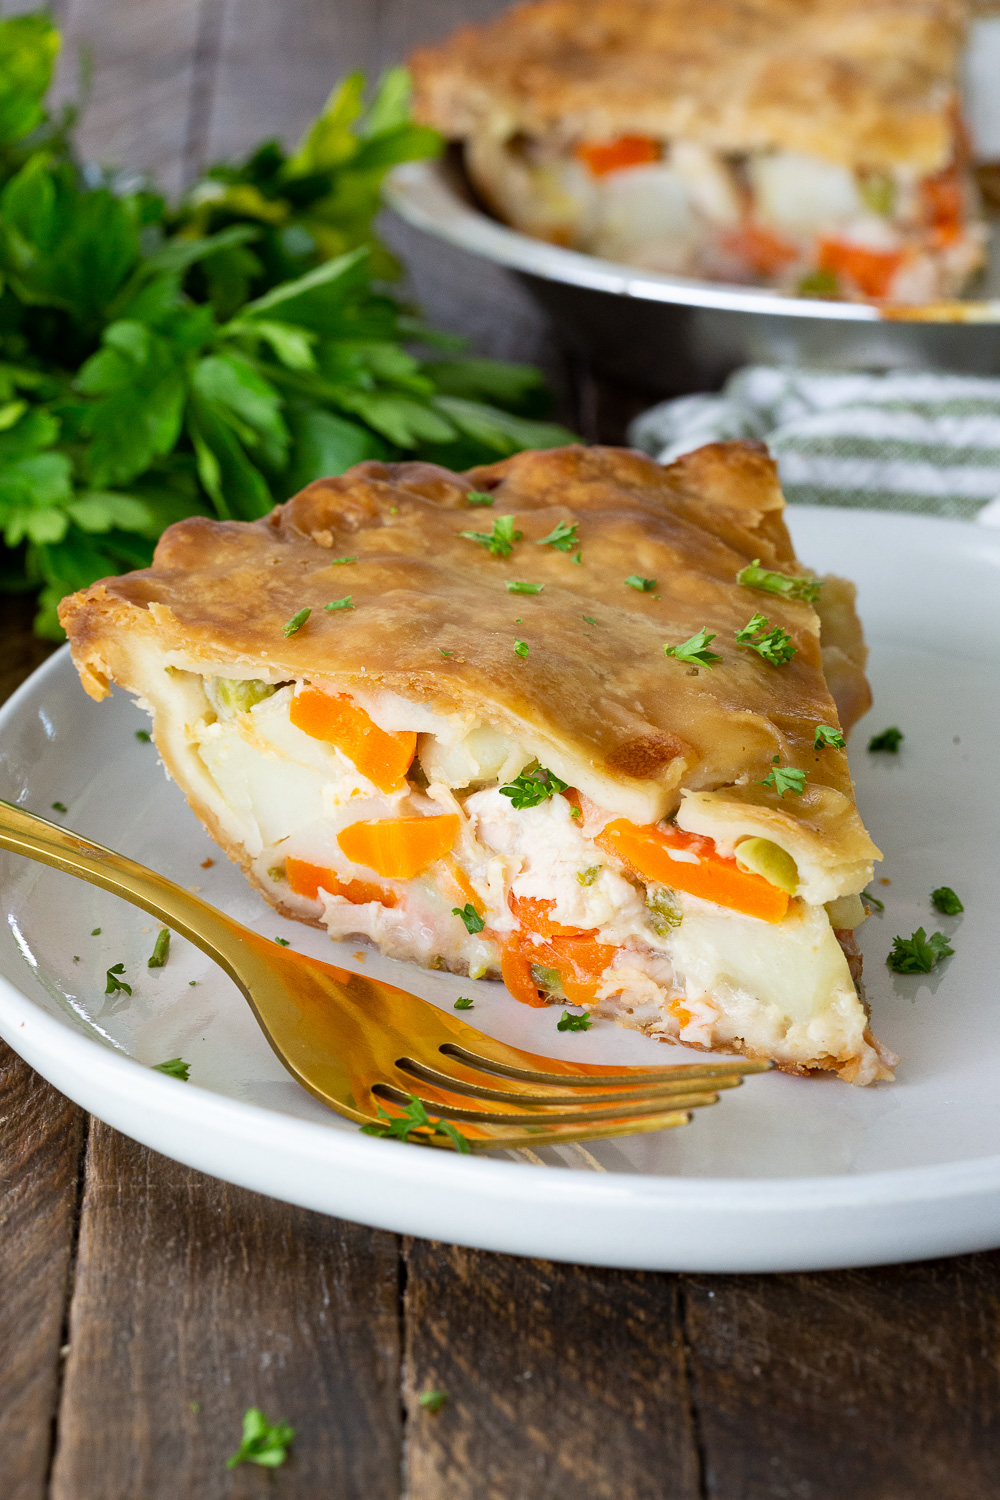 Homemade chicken pot pie, a simple recipe that is easy to make and so delicious